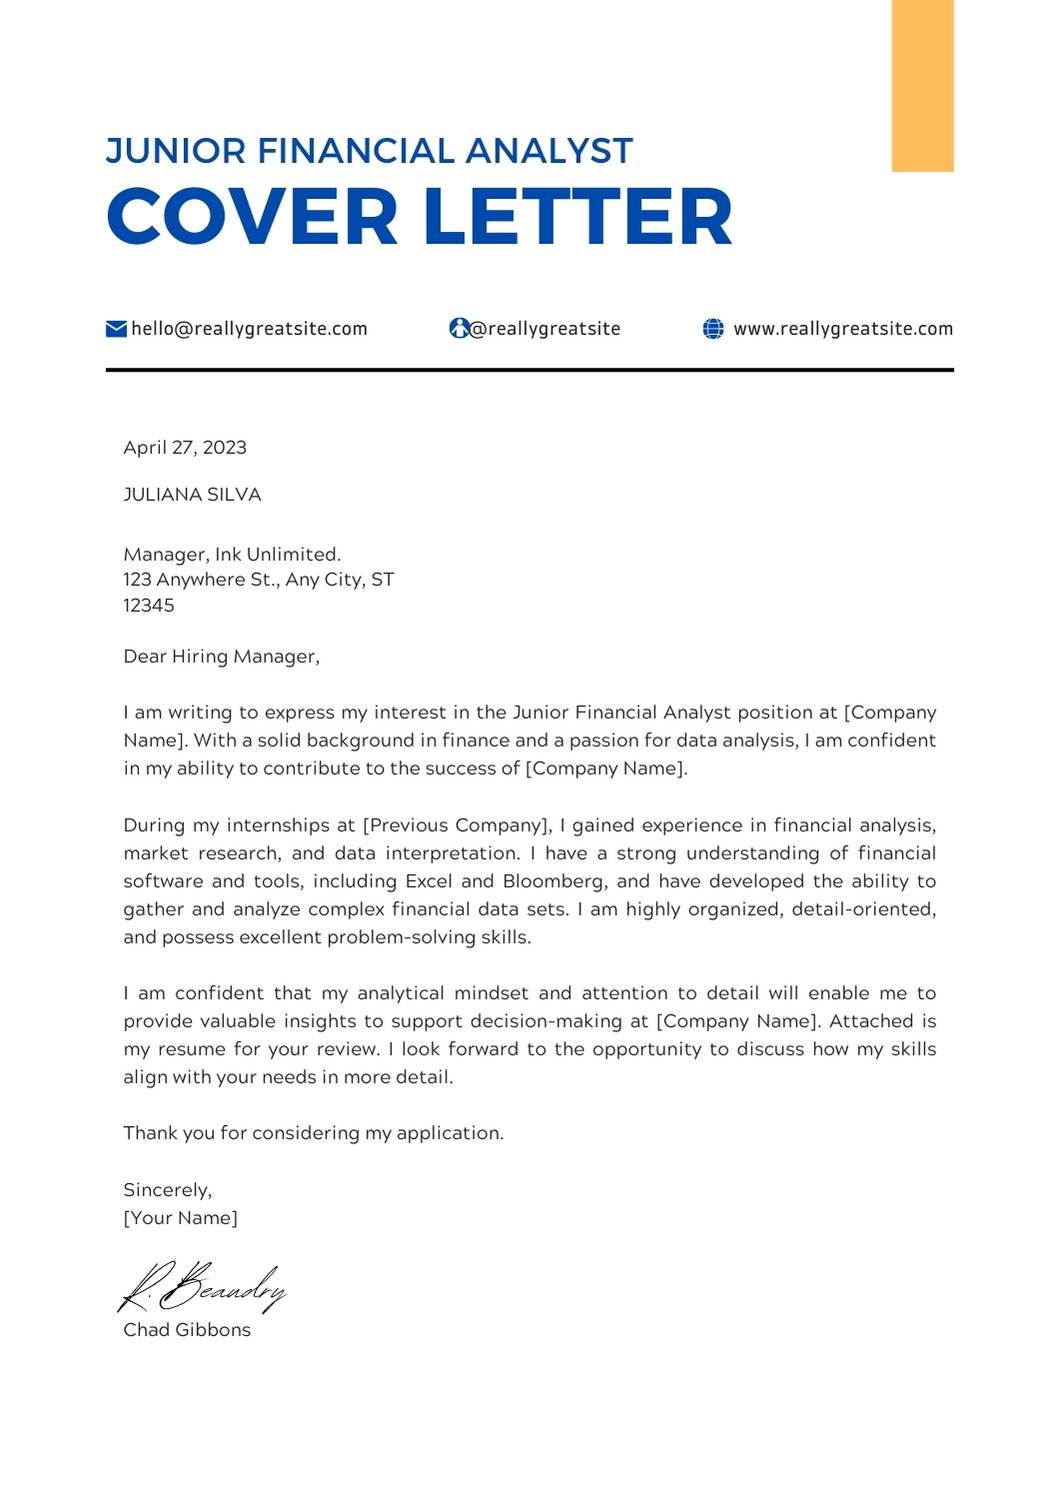 cover letter junior financial analyst